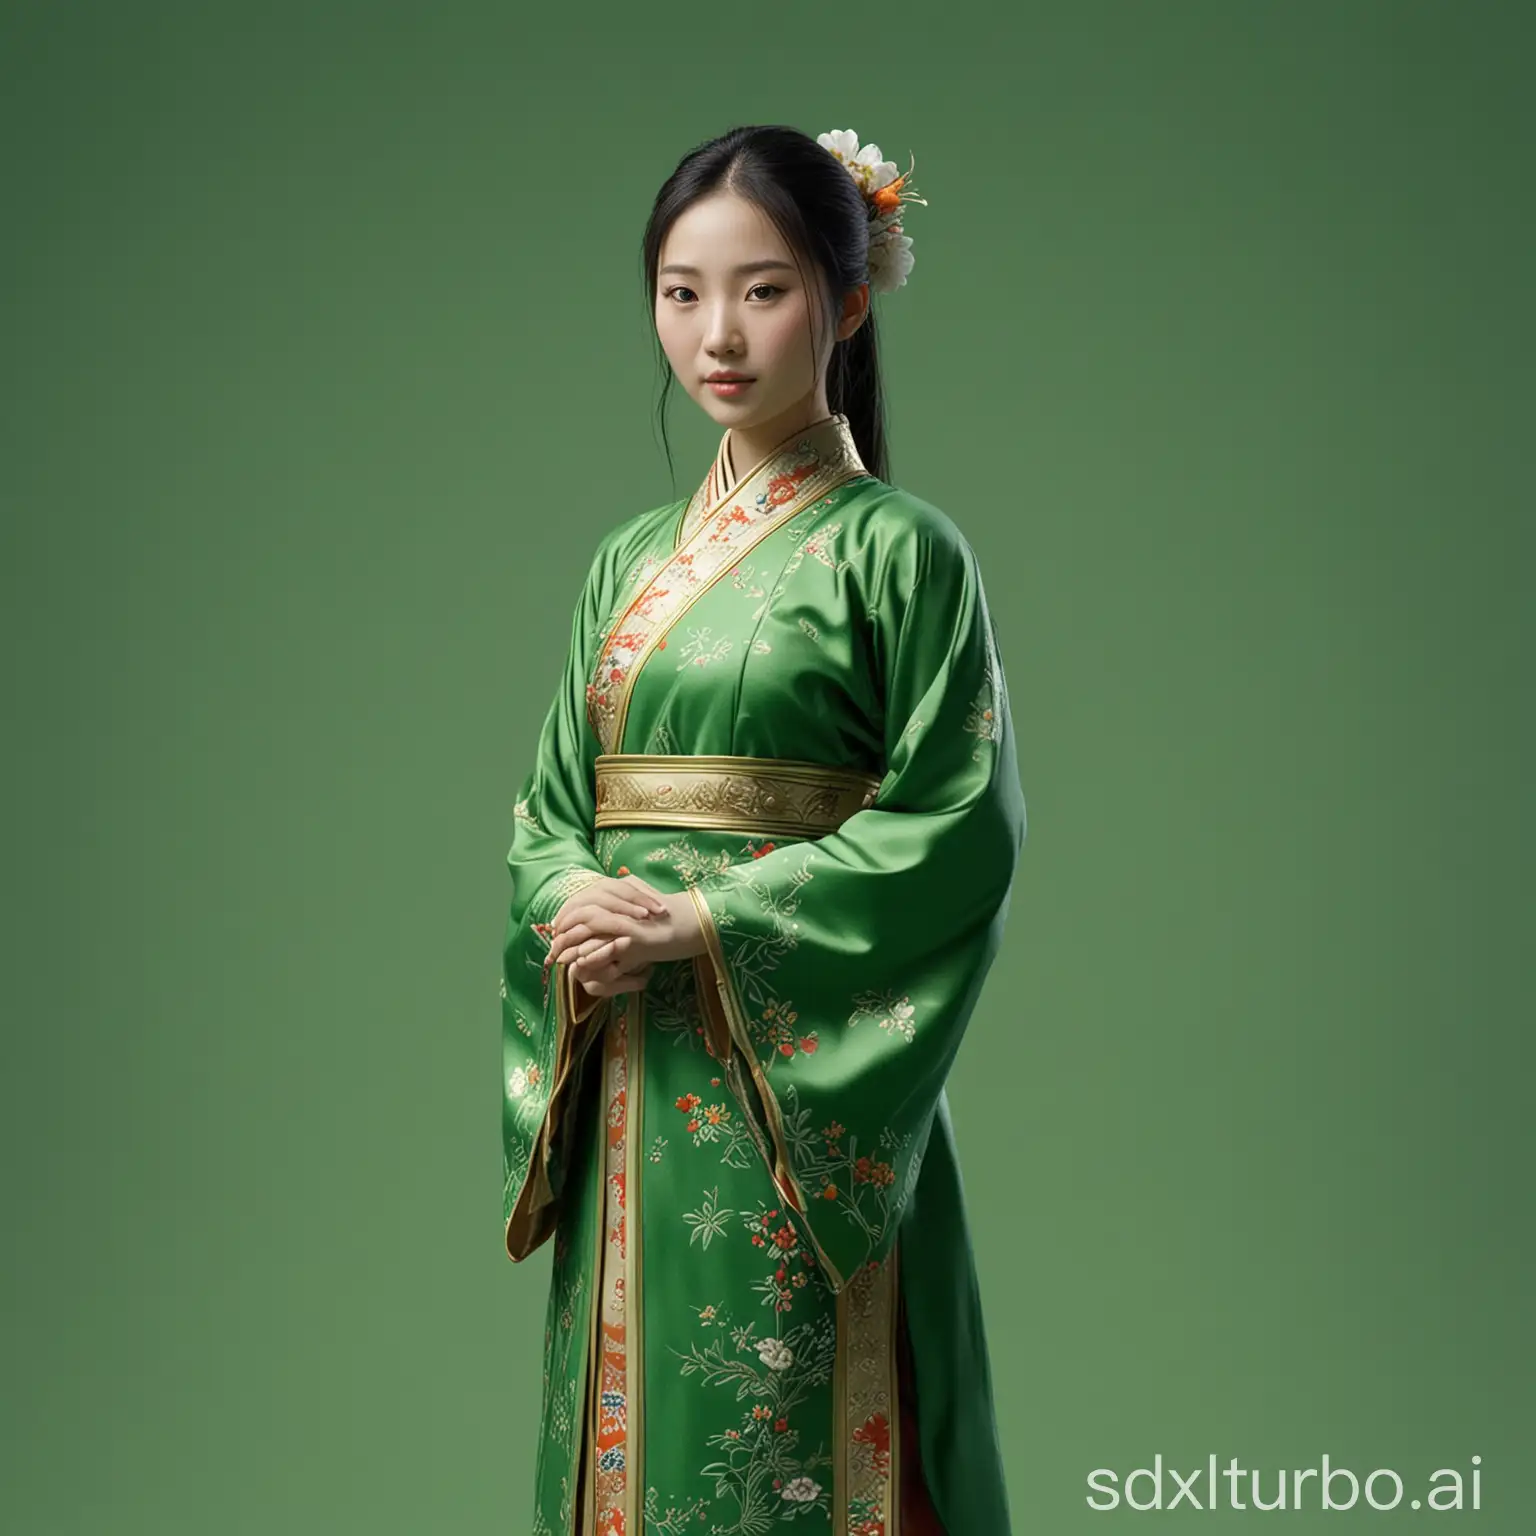 UltraRealistic-Chinese-Girl-in-Traditional-Attire-Against-Green-Screen-Background